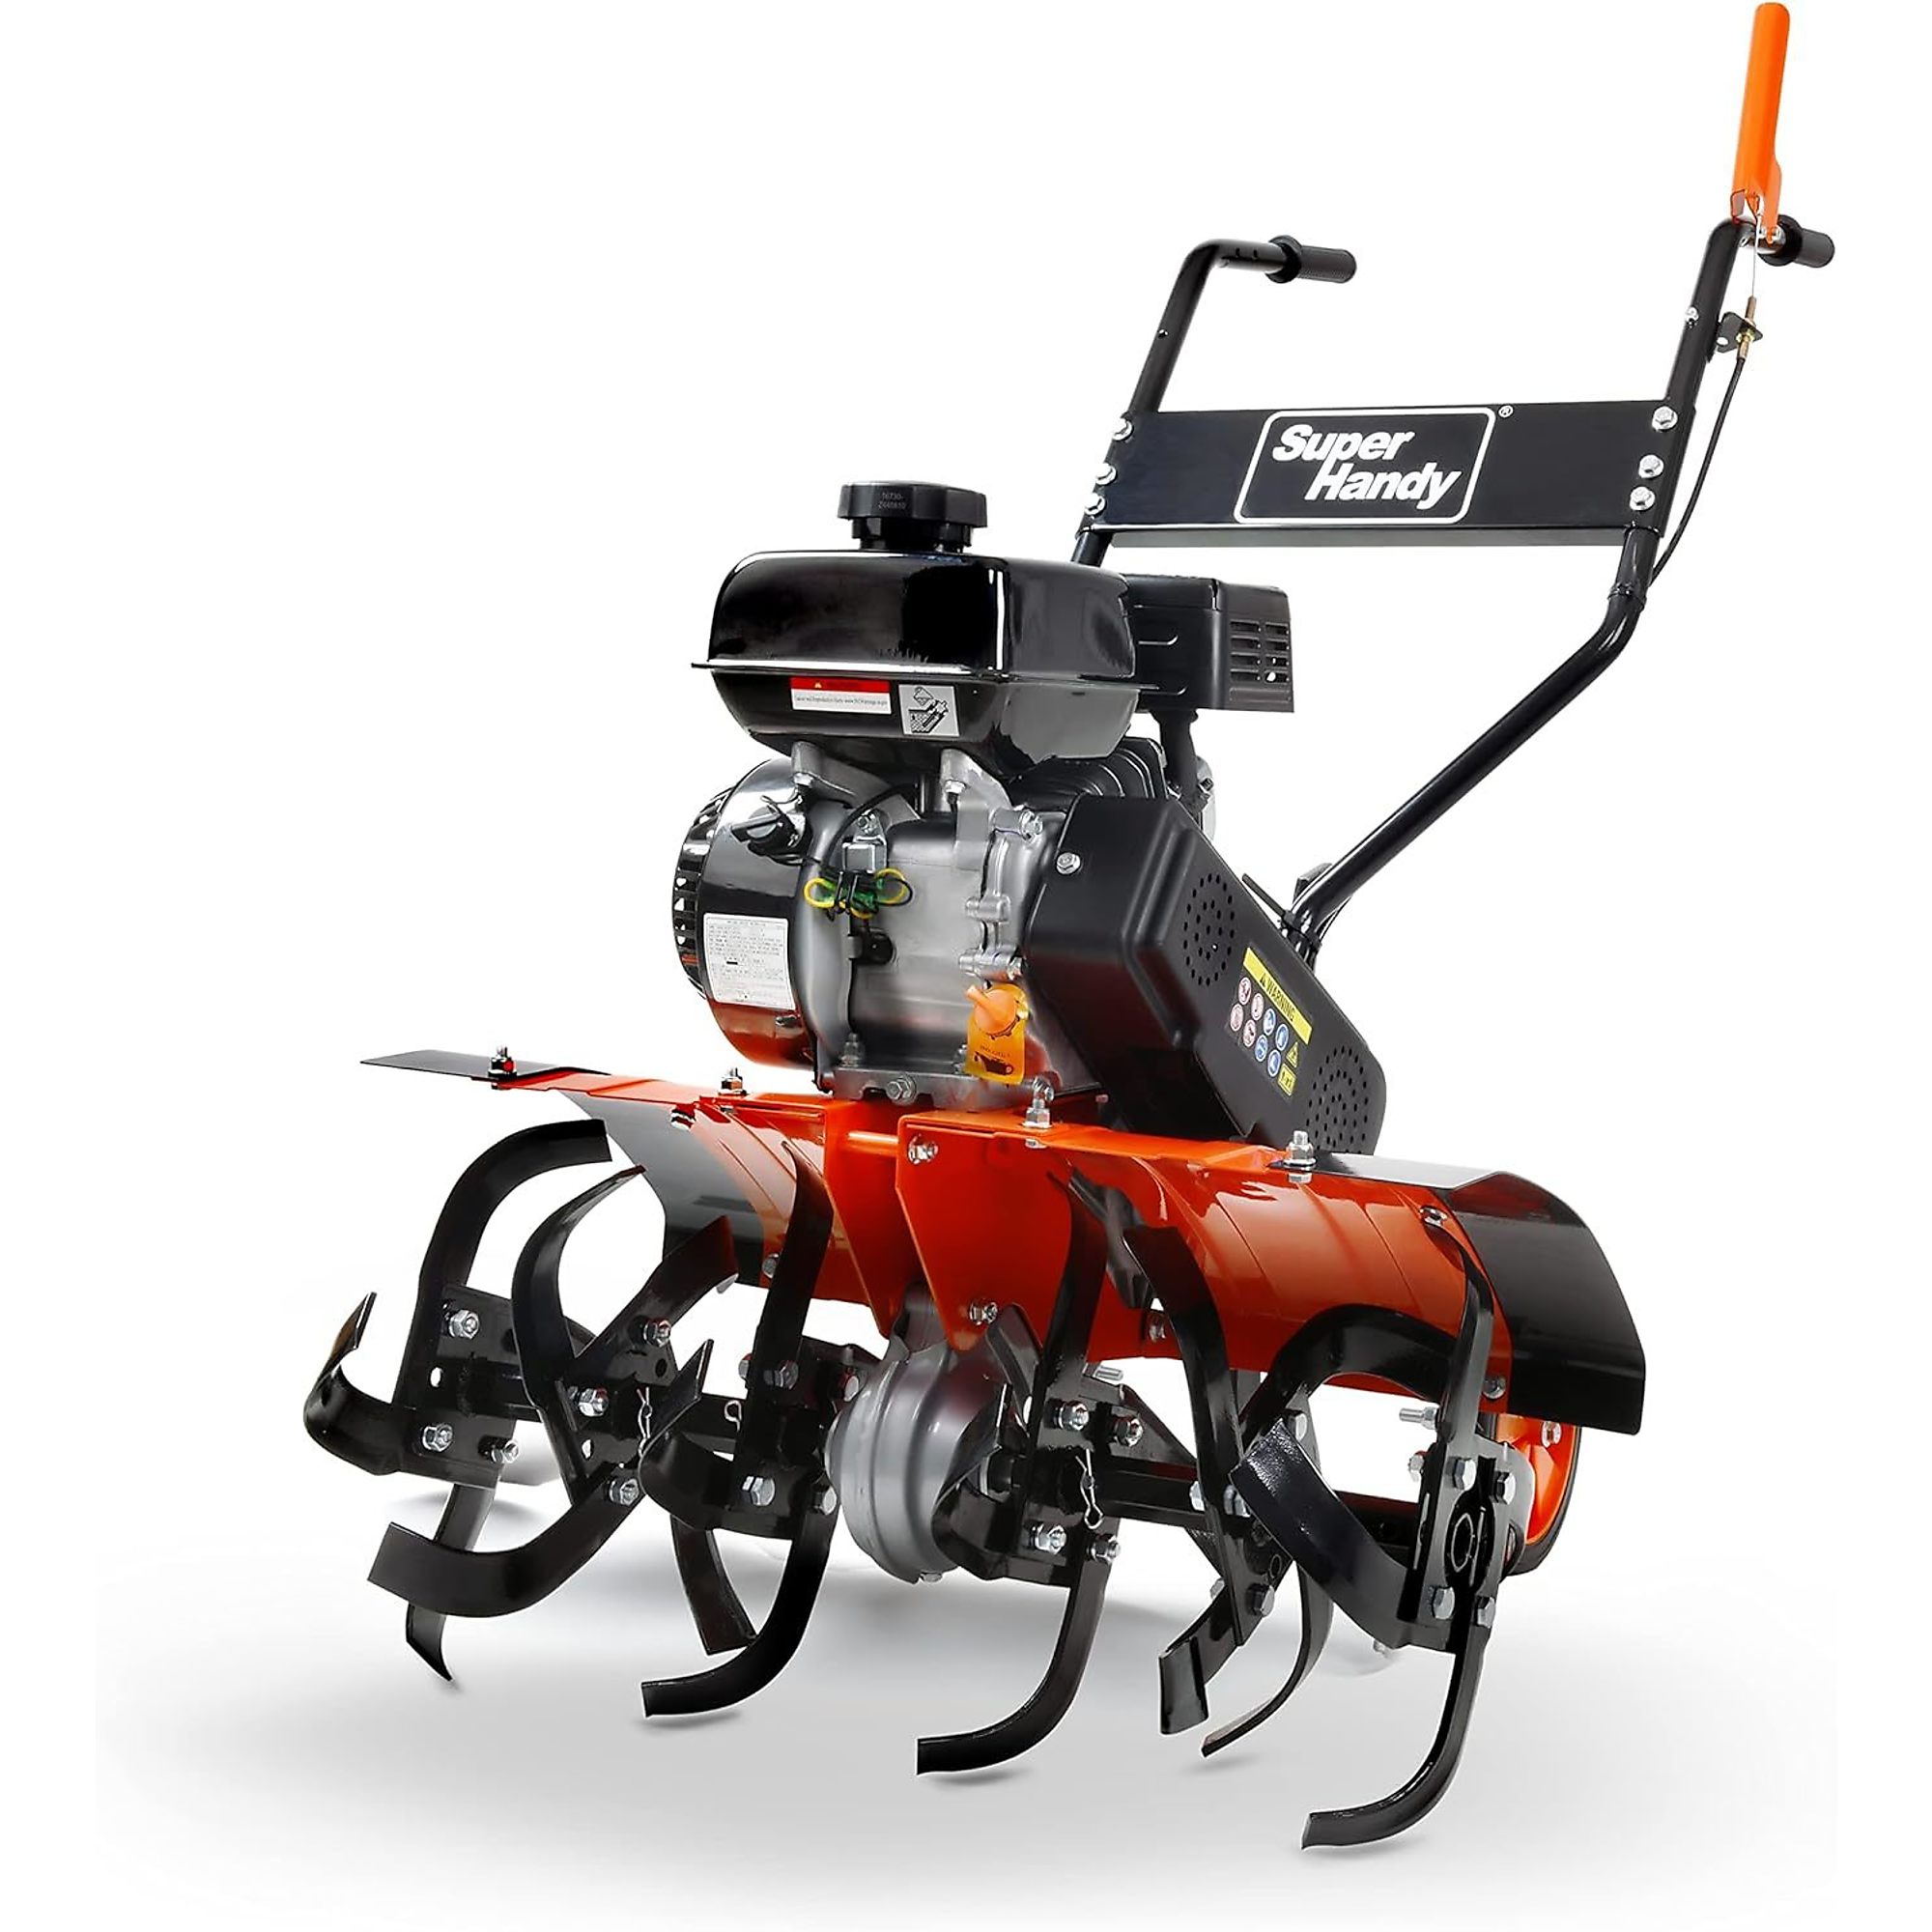 SuperHandy, Roto Tiller Cultivator 27Inch 209cc, Max. Working Width 27 in, Engine Displacement 209 cc, Model TRI-GUO093